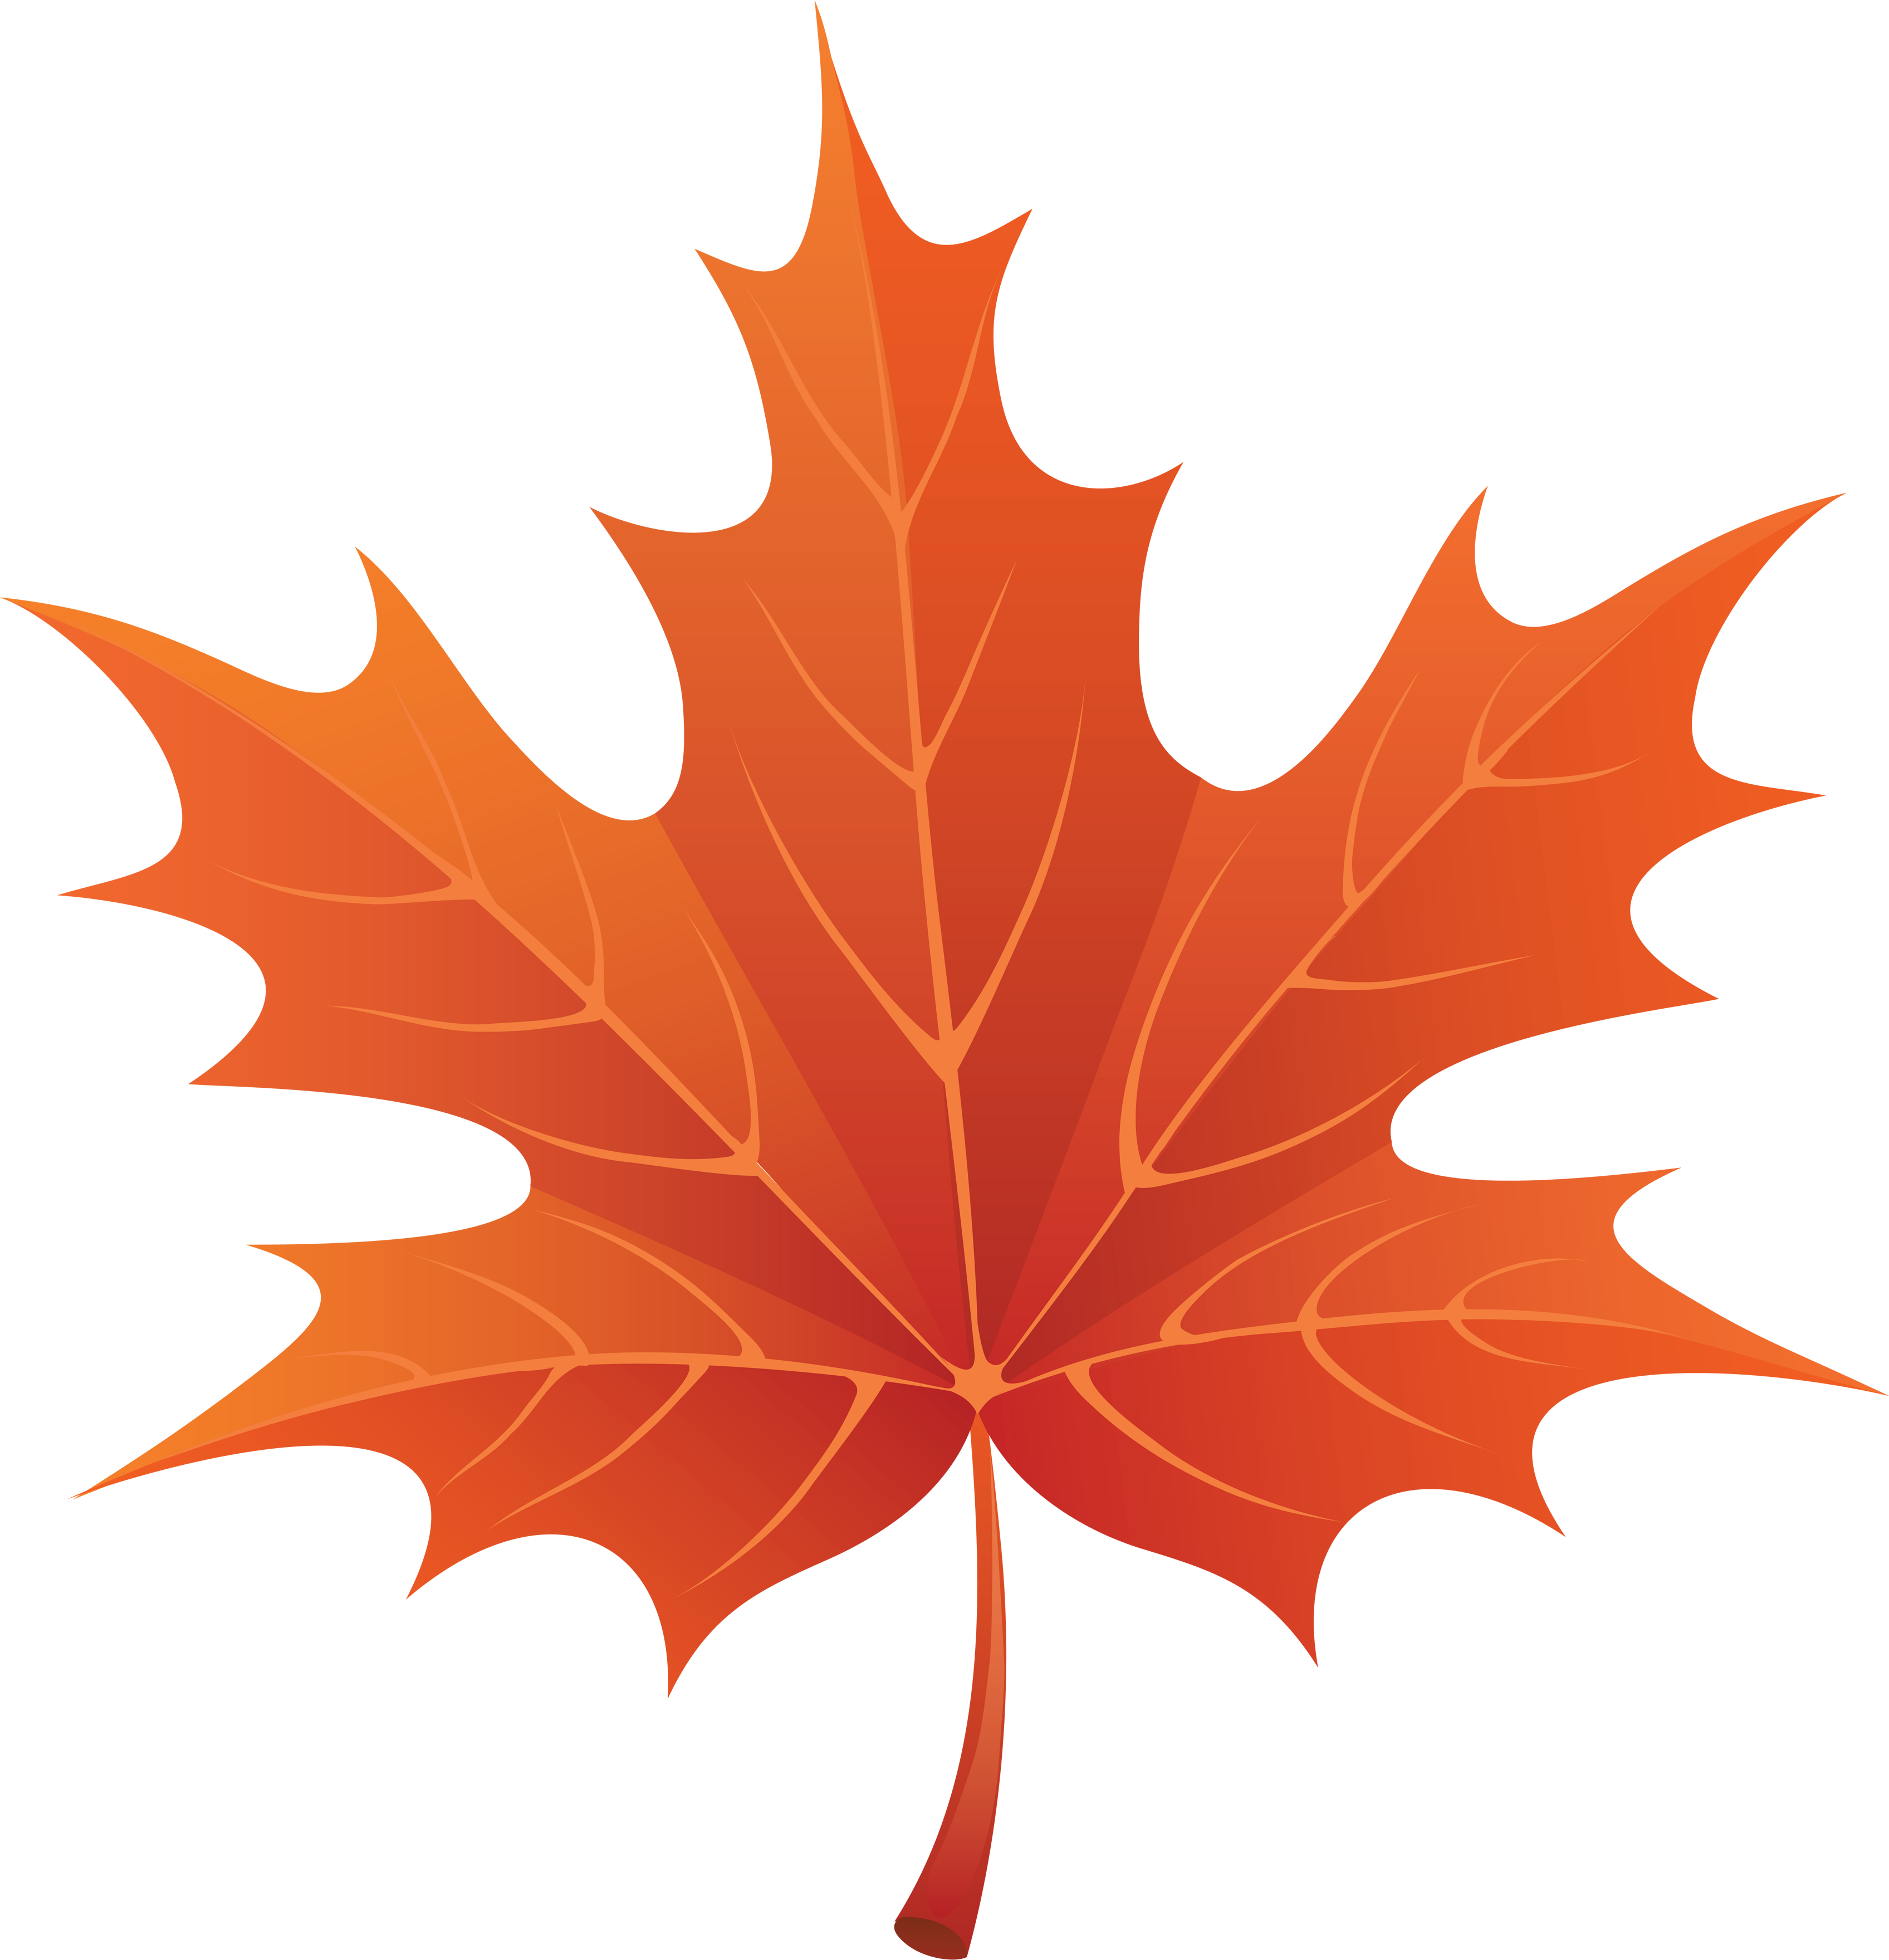 Maple Leaf clipart #15, Download drawings